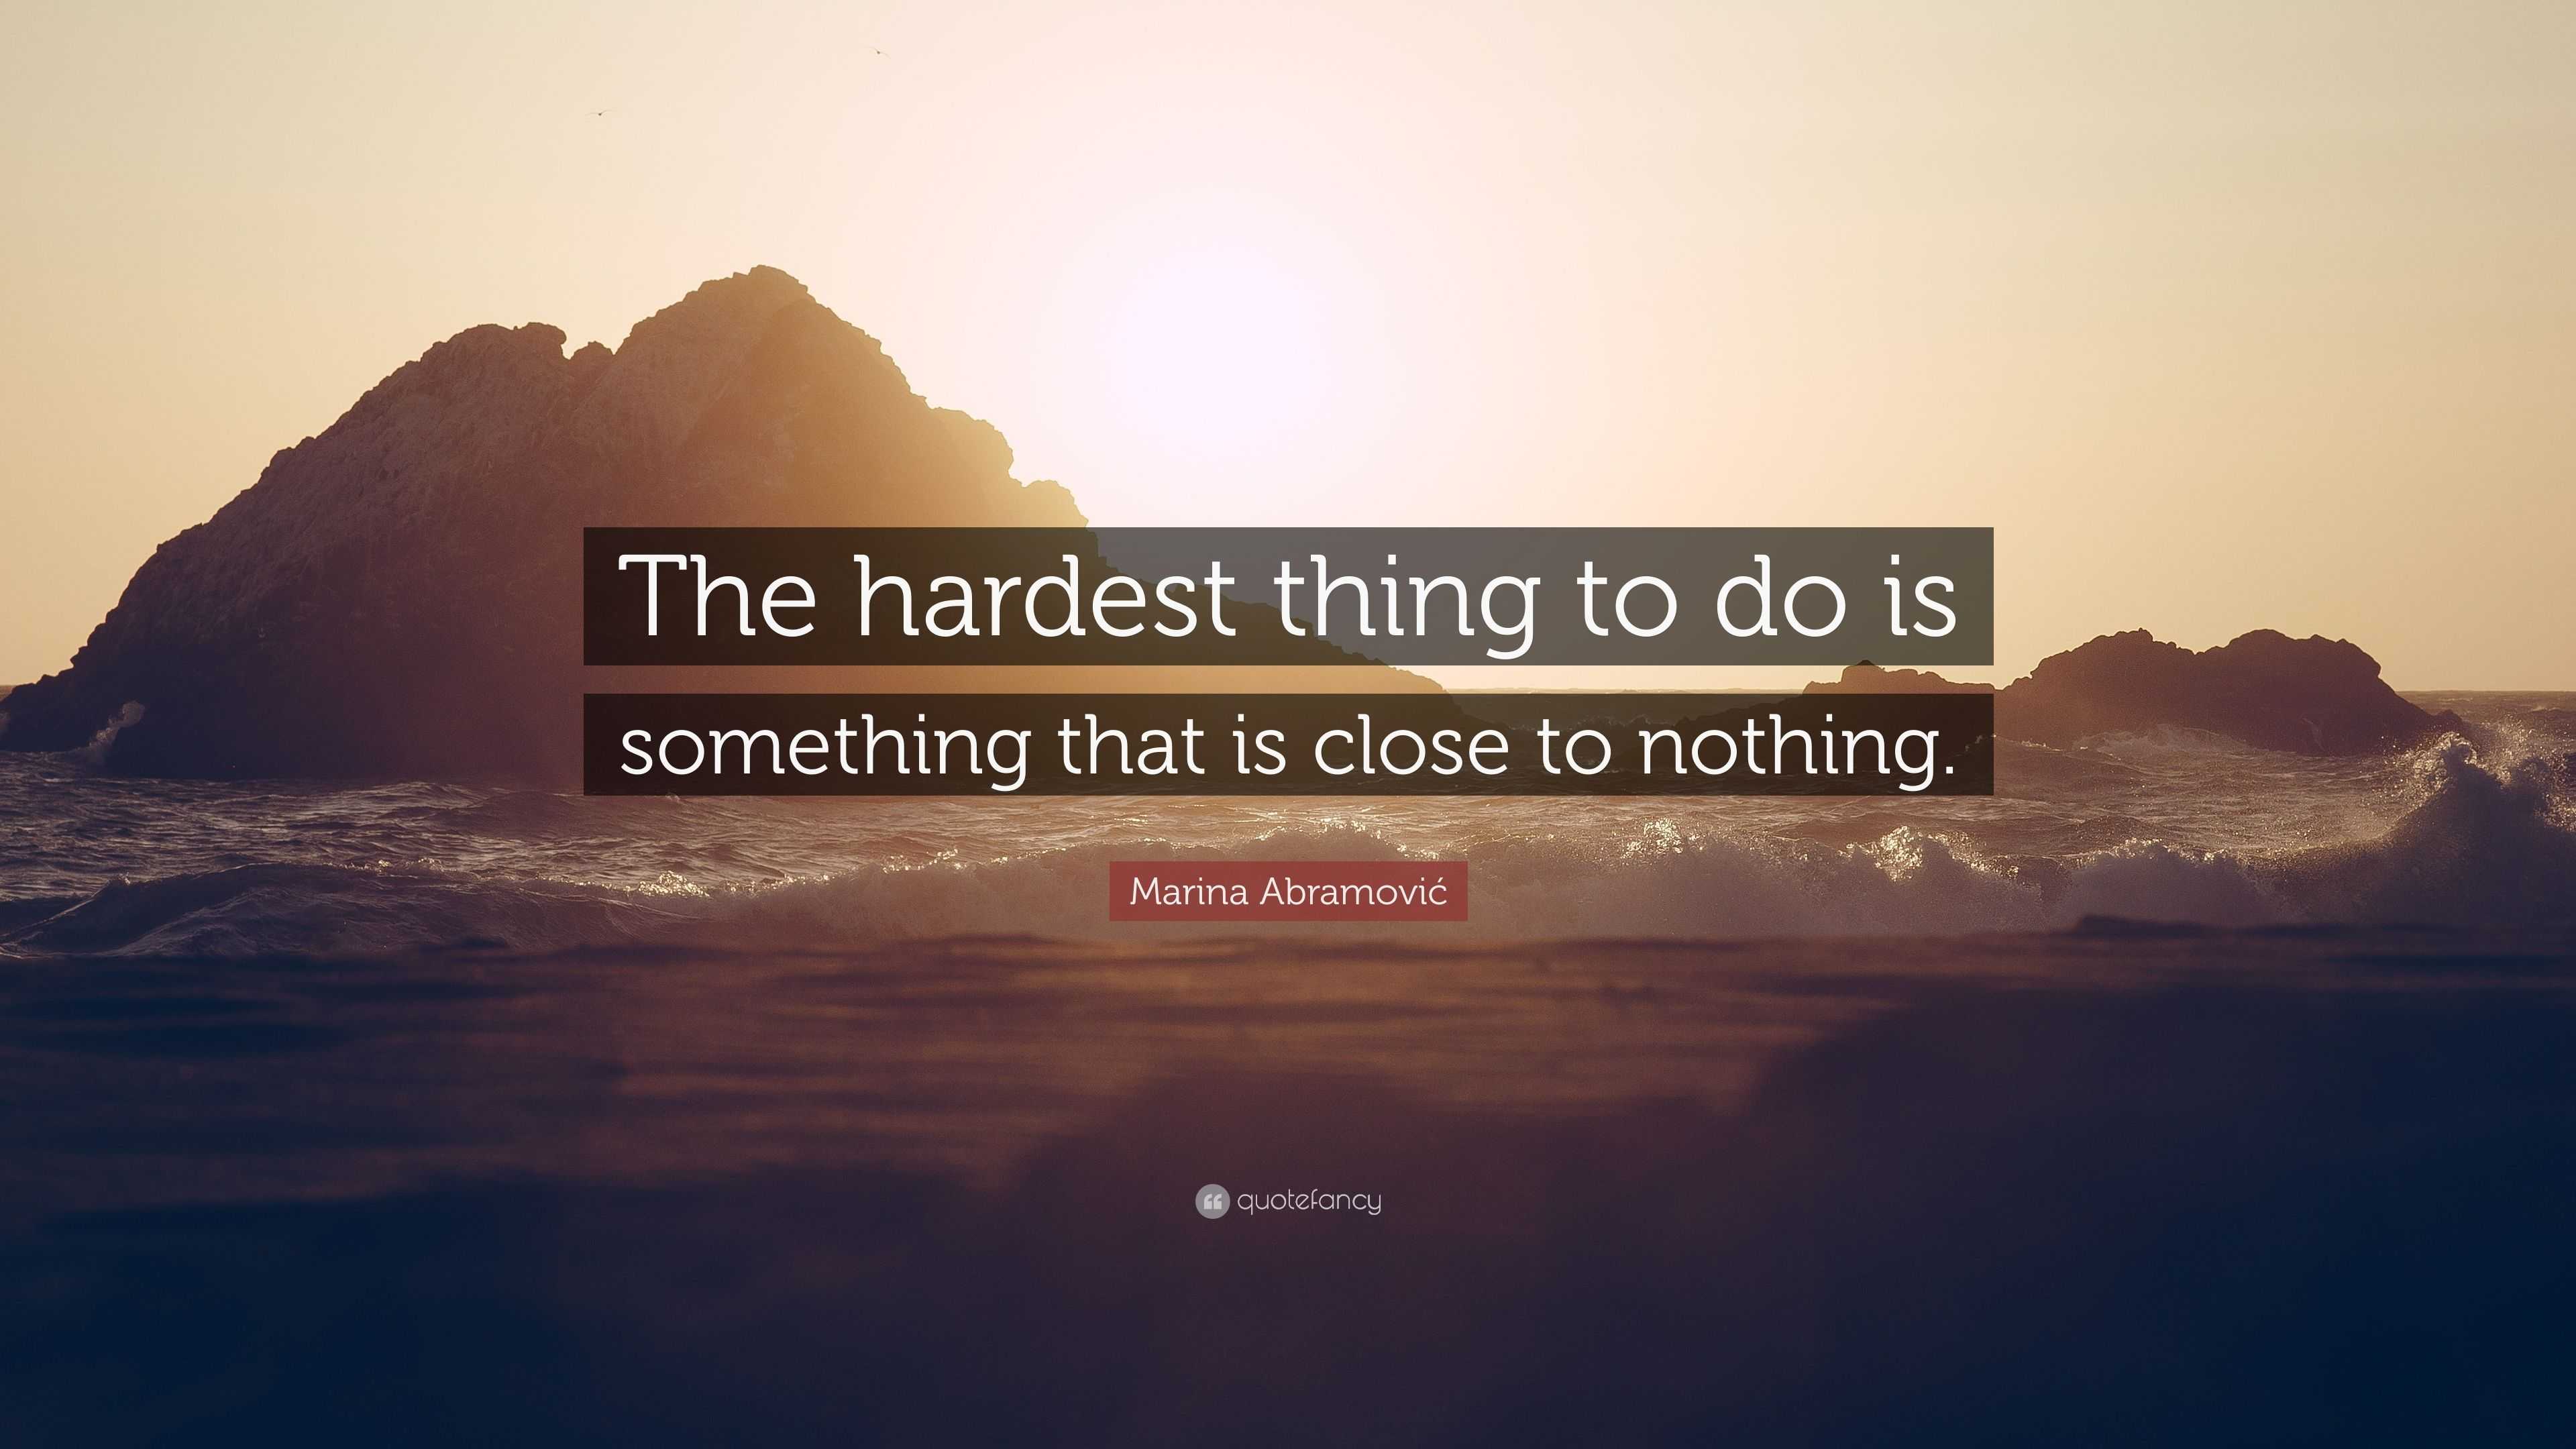 Marina Abramović Quote: “The hardest thing to do is something that is ...